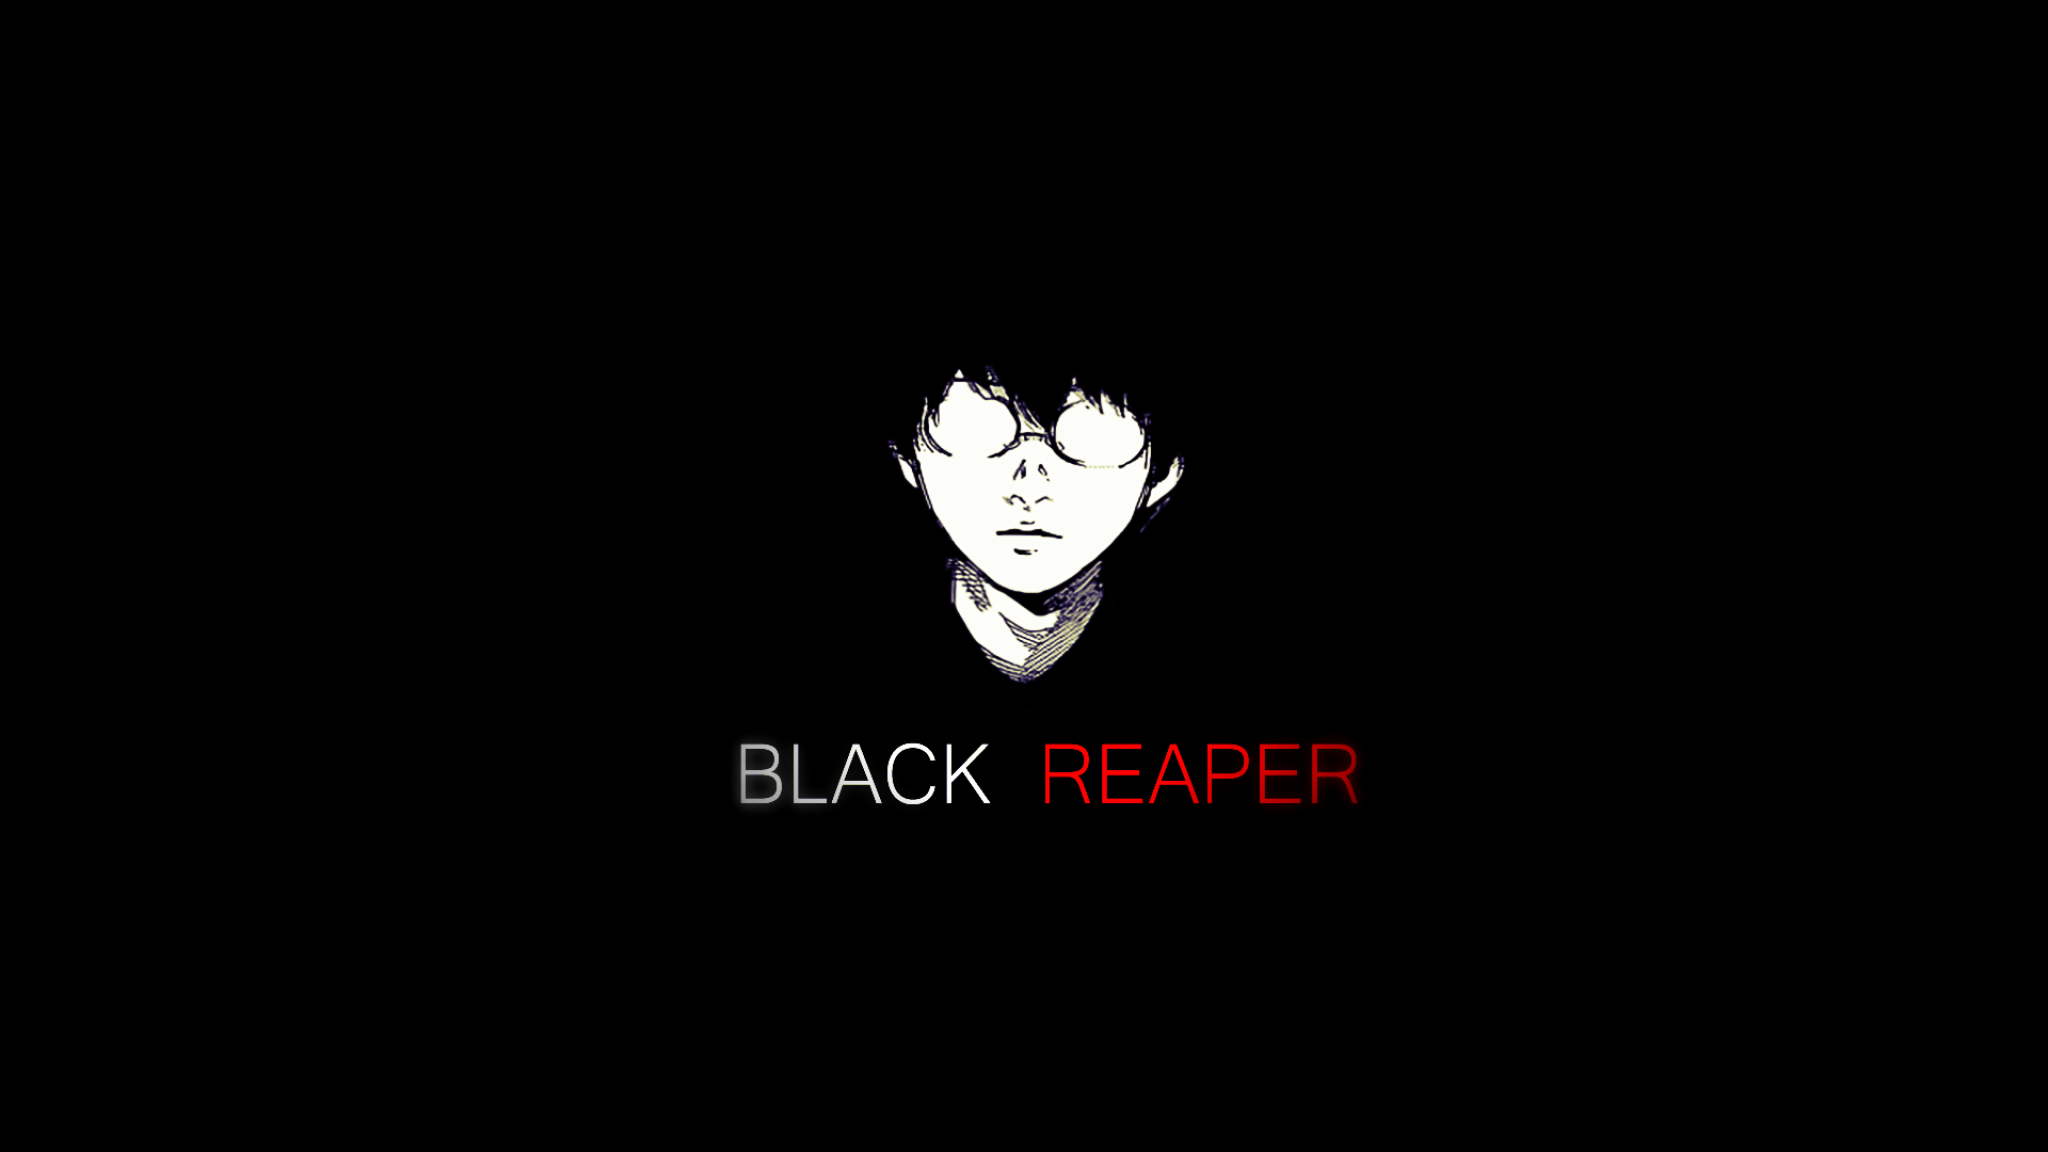 48x1152 Kaneki Black Reaper 48x1152 Resolution Wallpaper Hd Anime 4k Wallpapers Images Photos And Background